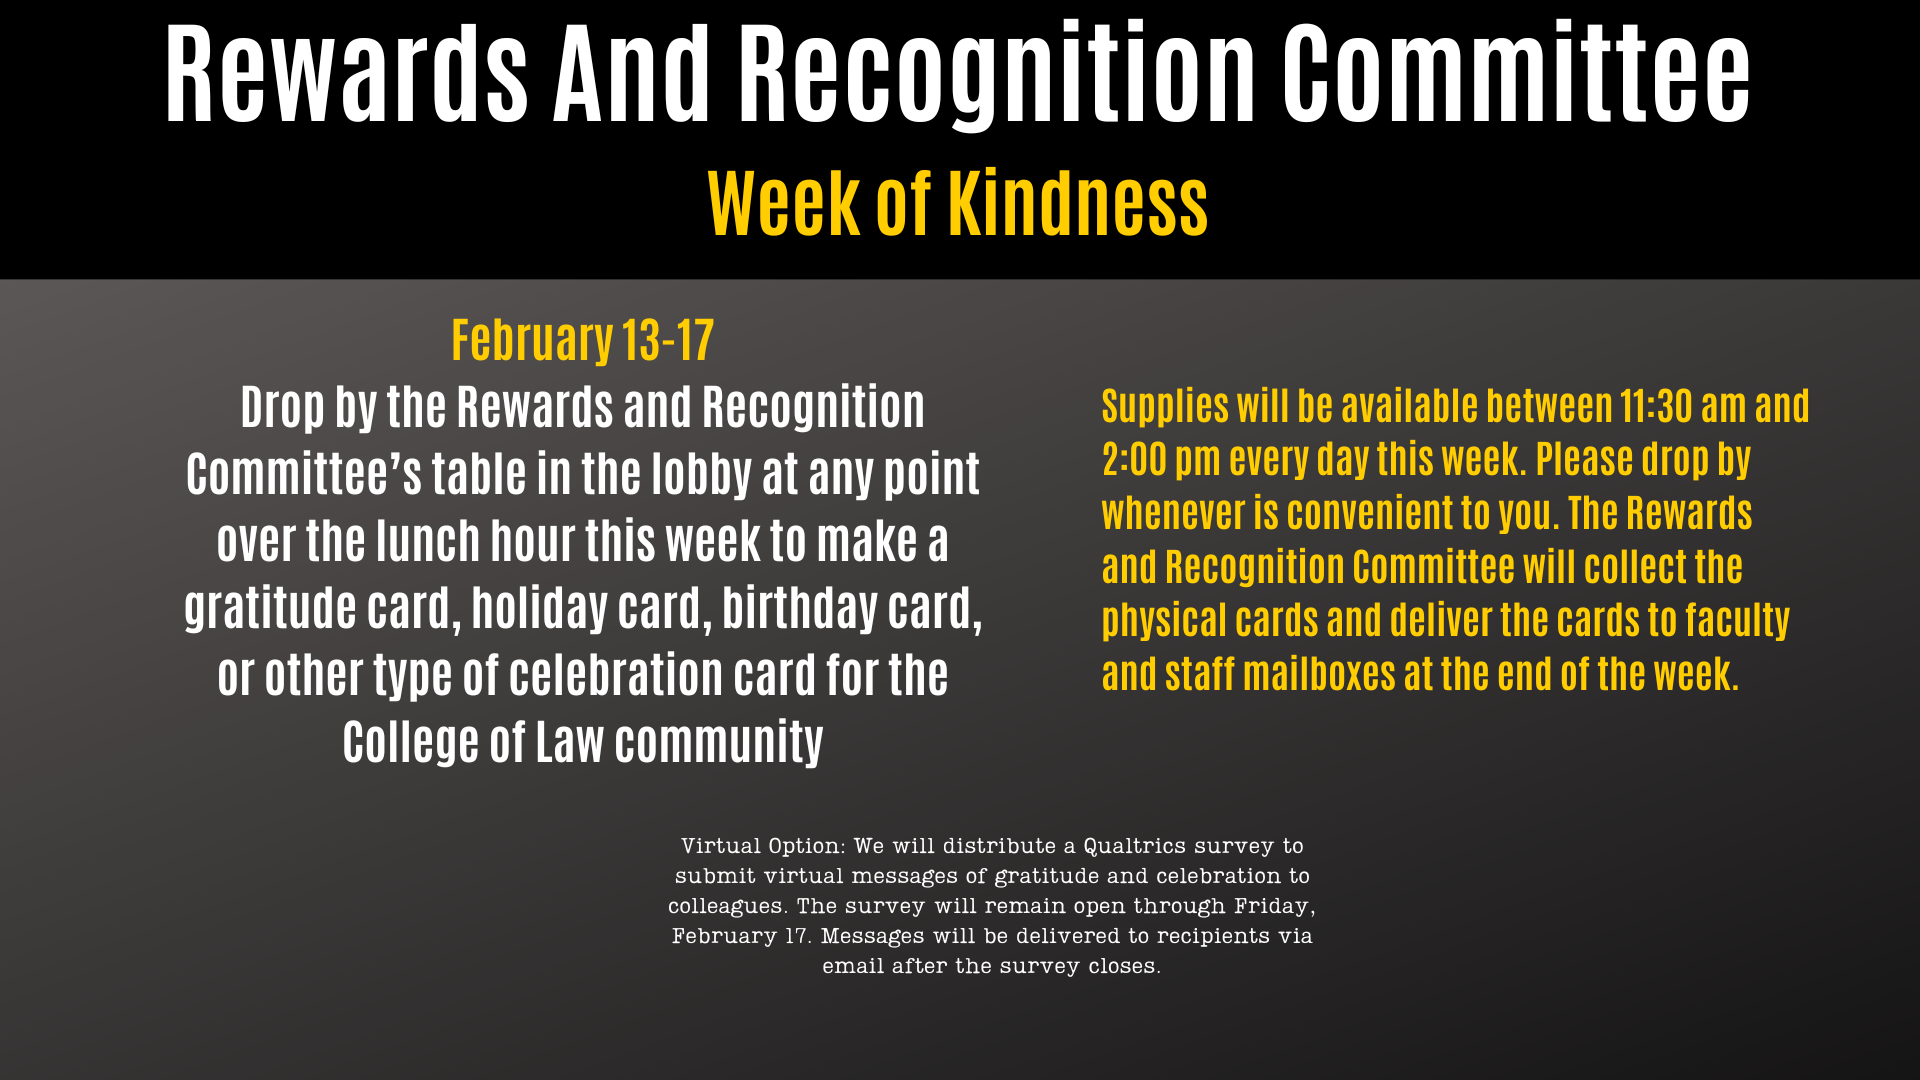 Rewards And Recognition Committee Week of Kindness February 13-17 Drop by the Rewards and Recognition Committee’s table in the lobby at any point over the lunch hour this week to make a gratitude card, holiday card, birthday card, or other type of celebration card for the College of Law community Supplies will be available between 11:30 am and 2:00 pm every day this week. Please drop by whenever is convenient to you. The Rewards and Recognition Committee will collect the physical cards and deliver the cards to faculty and staff mailboxes at the end of the week. Virtual Option: We will distribute a Qualtrics survey to submit virtual messages of gratitude and celebration to colleagues. The survey will remain open through Friday, February 17. Messages will be delivered to recipients via email after the survey closes.